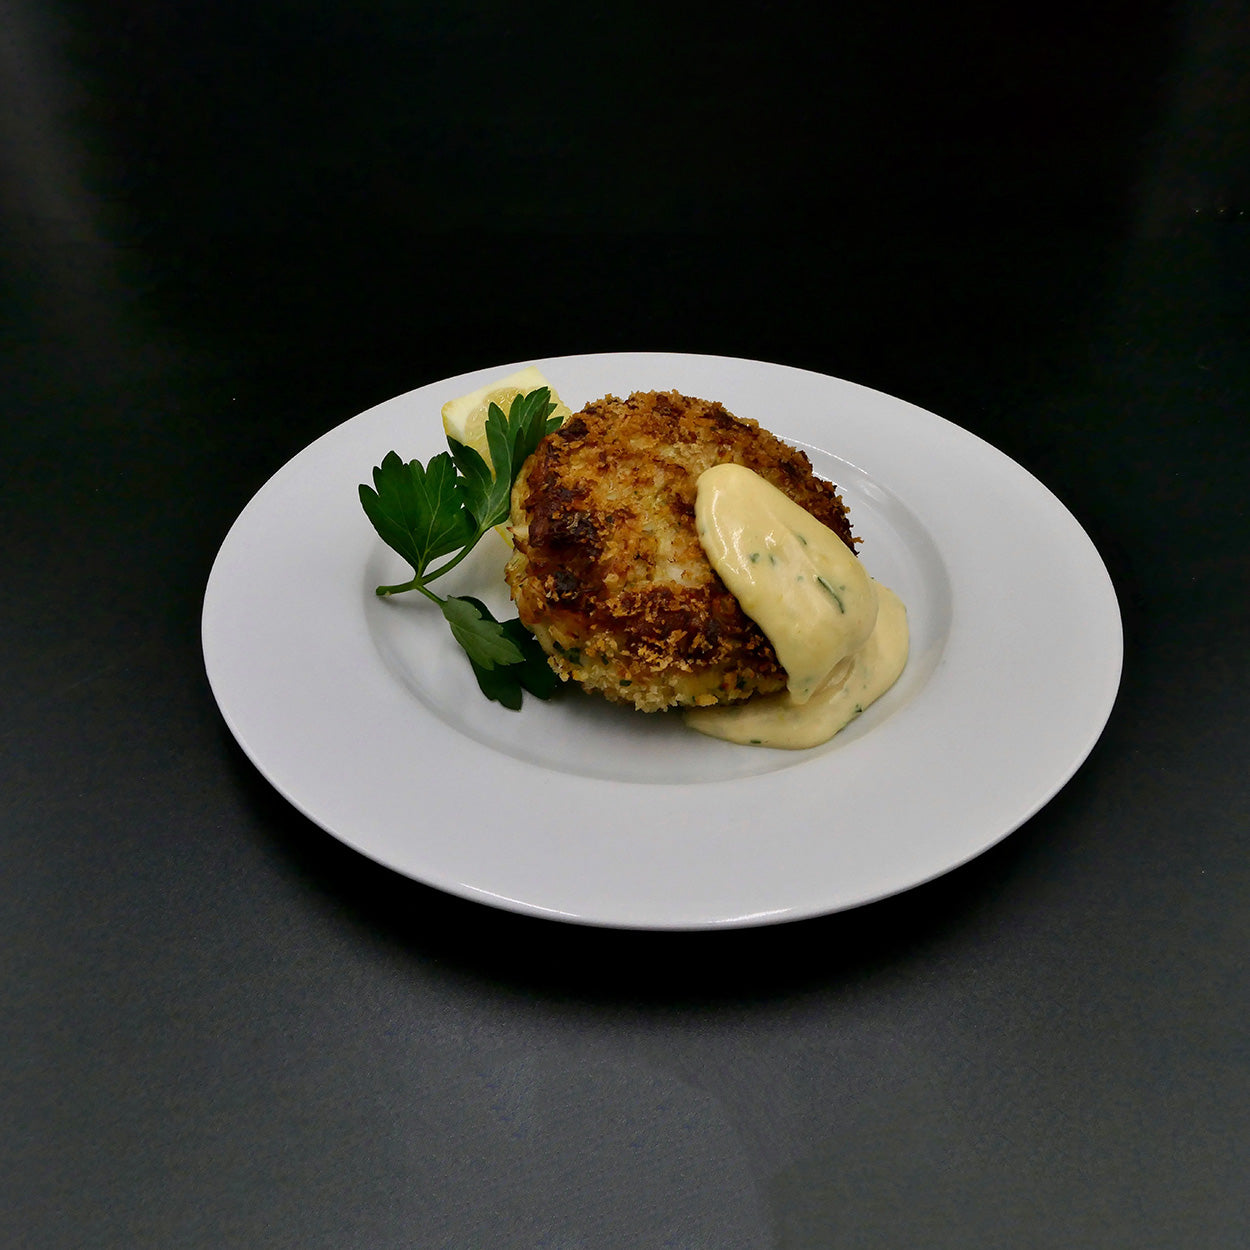 pan fried homemade crab cake topped with a dollop of spicy aioli sauce and a sprig of fresh parsley served on white plate with black background